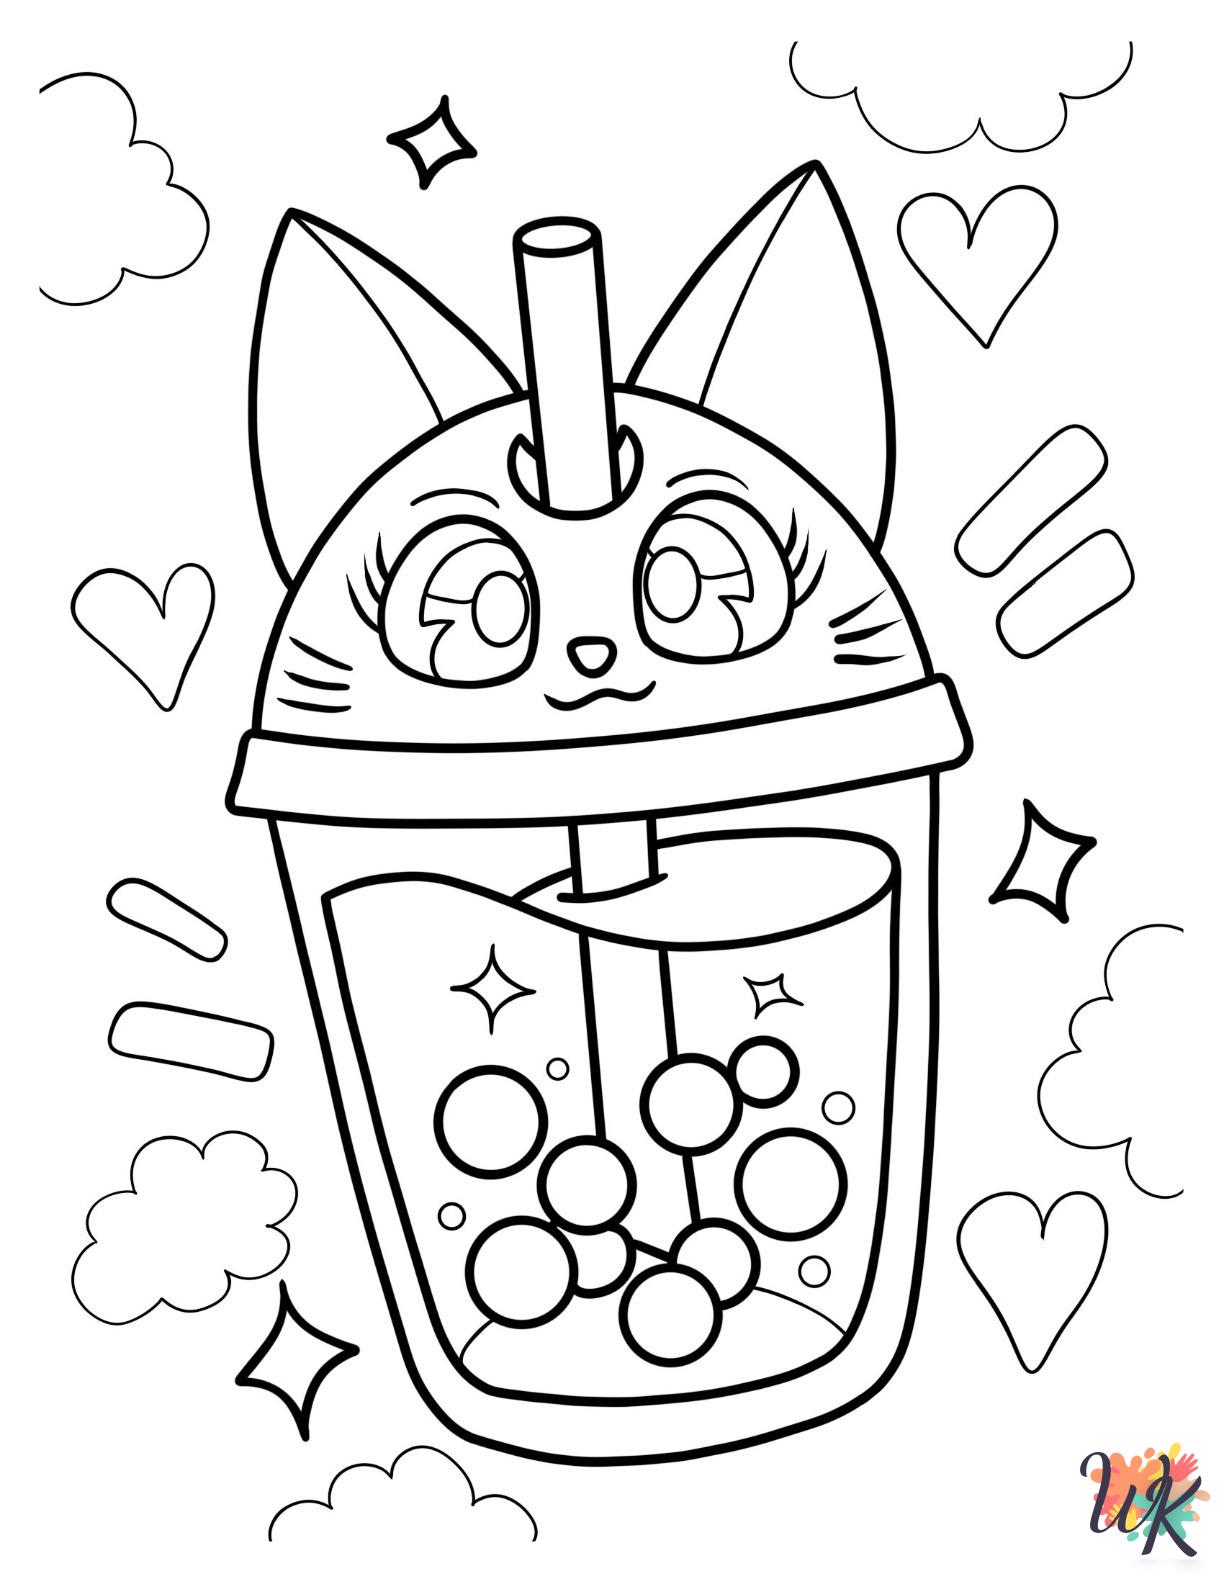 Boba Tea cards coloring pages